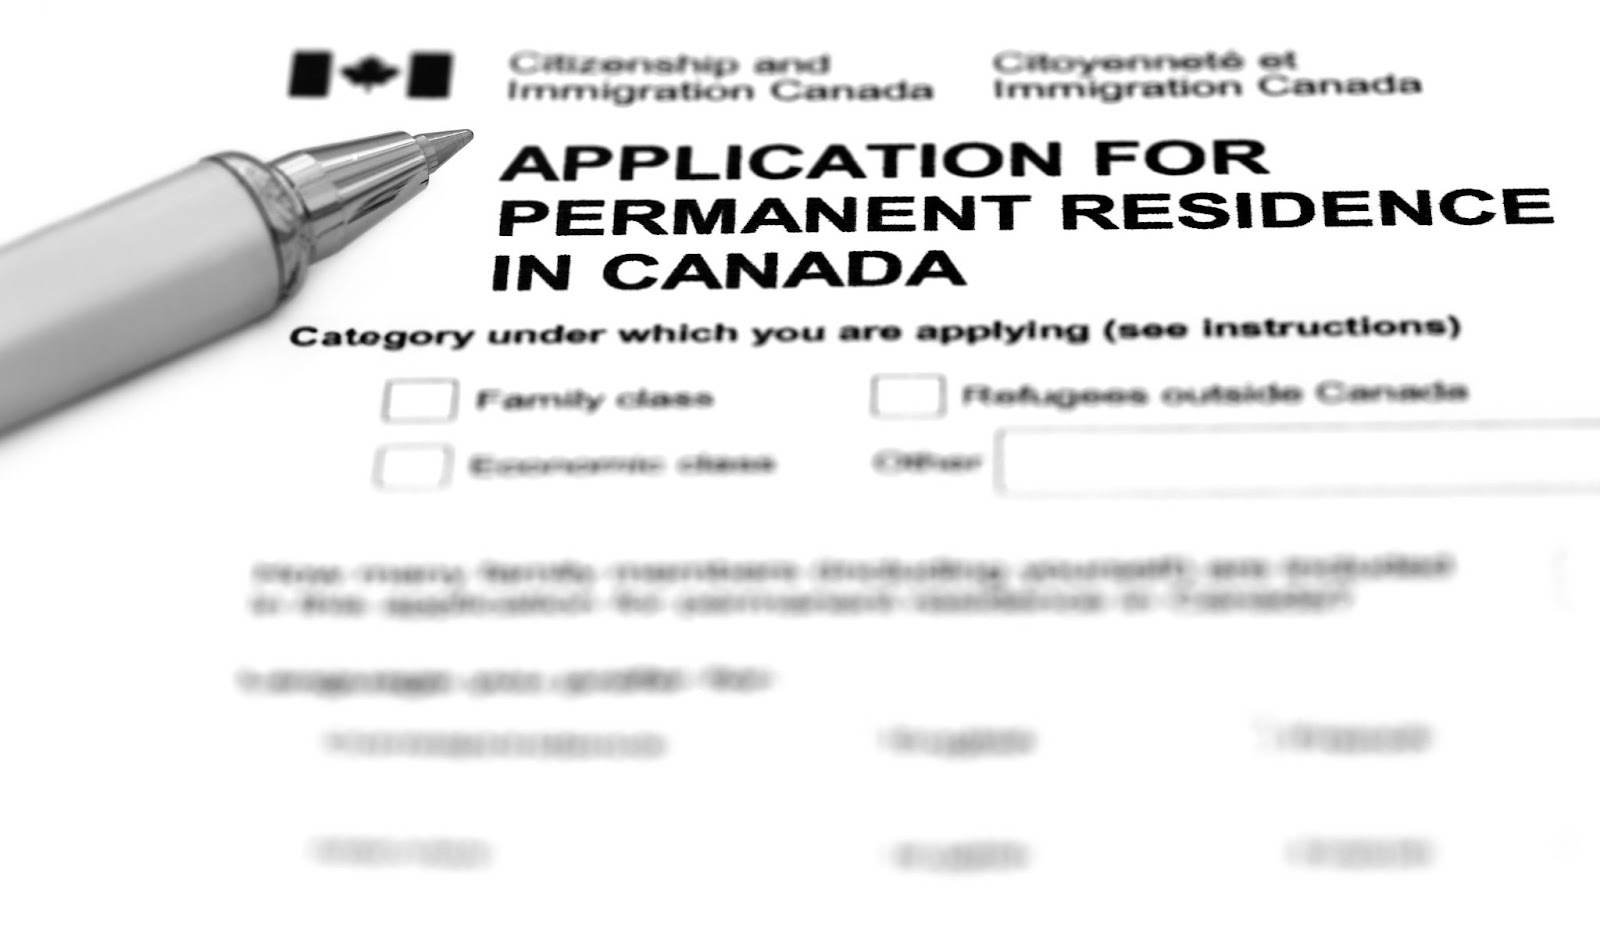 Transitioning from Work Visa to Permanent Residency in Canada